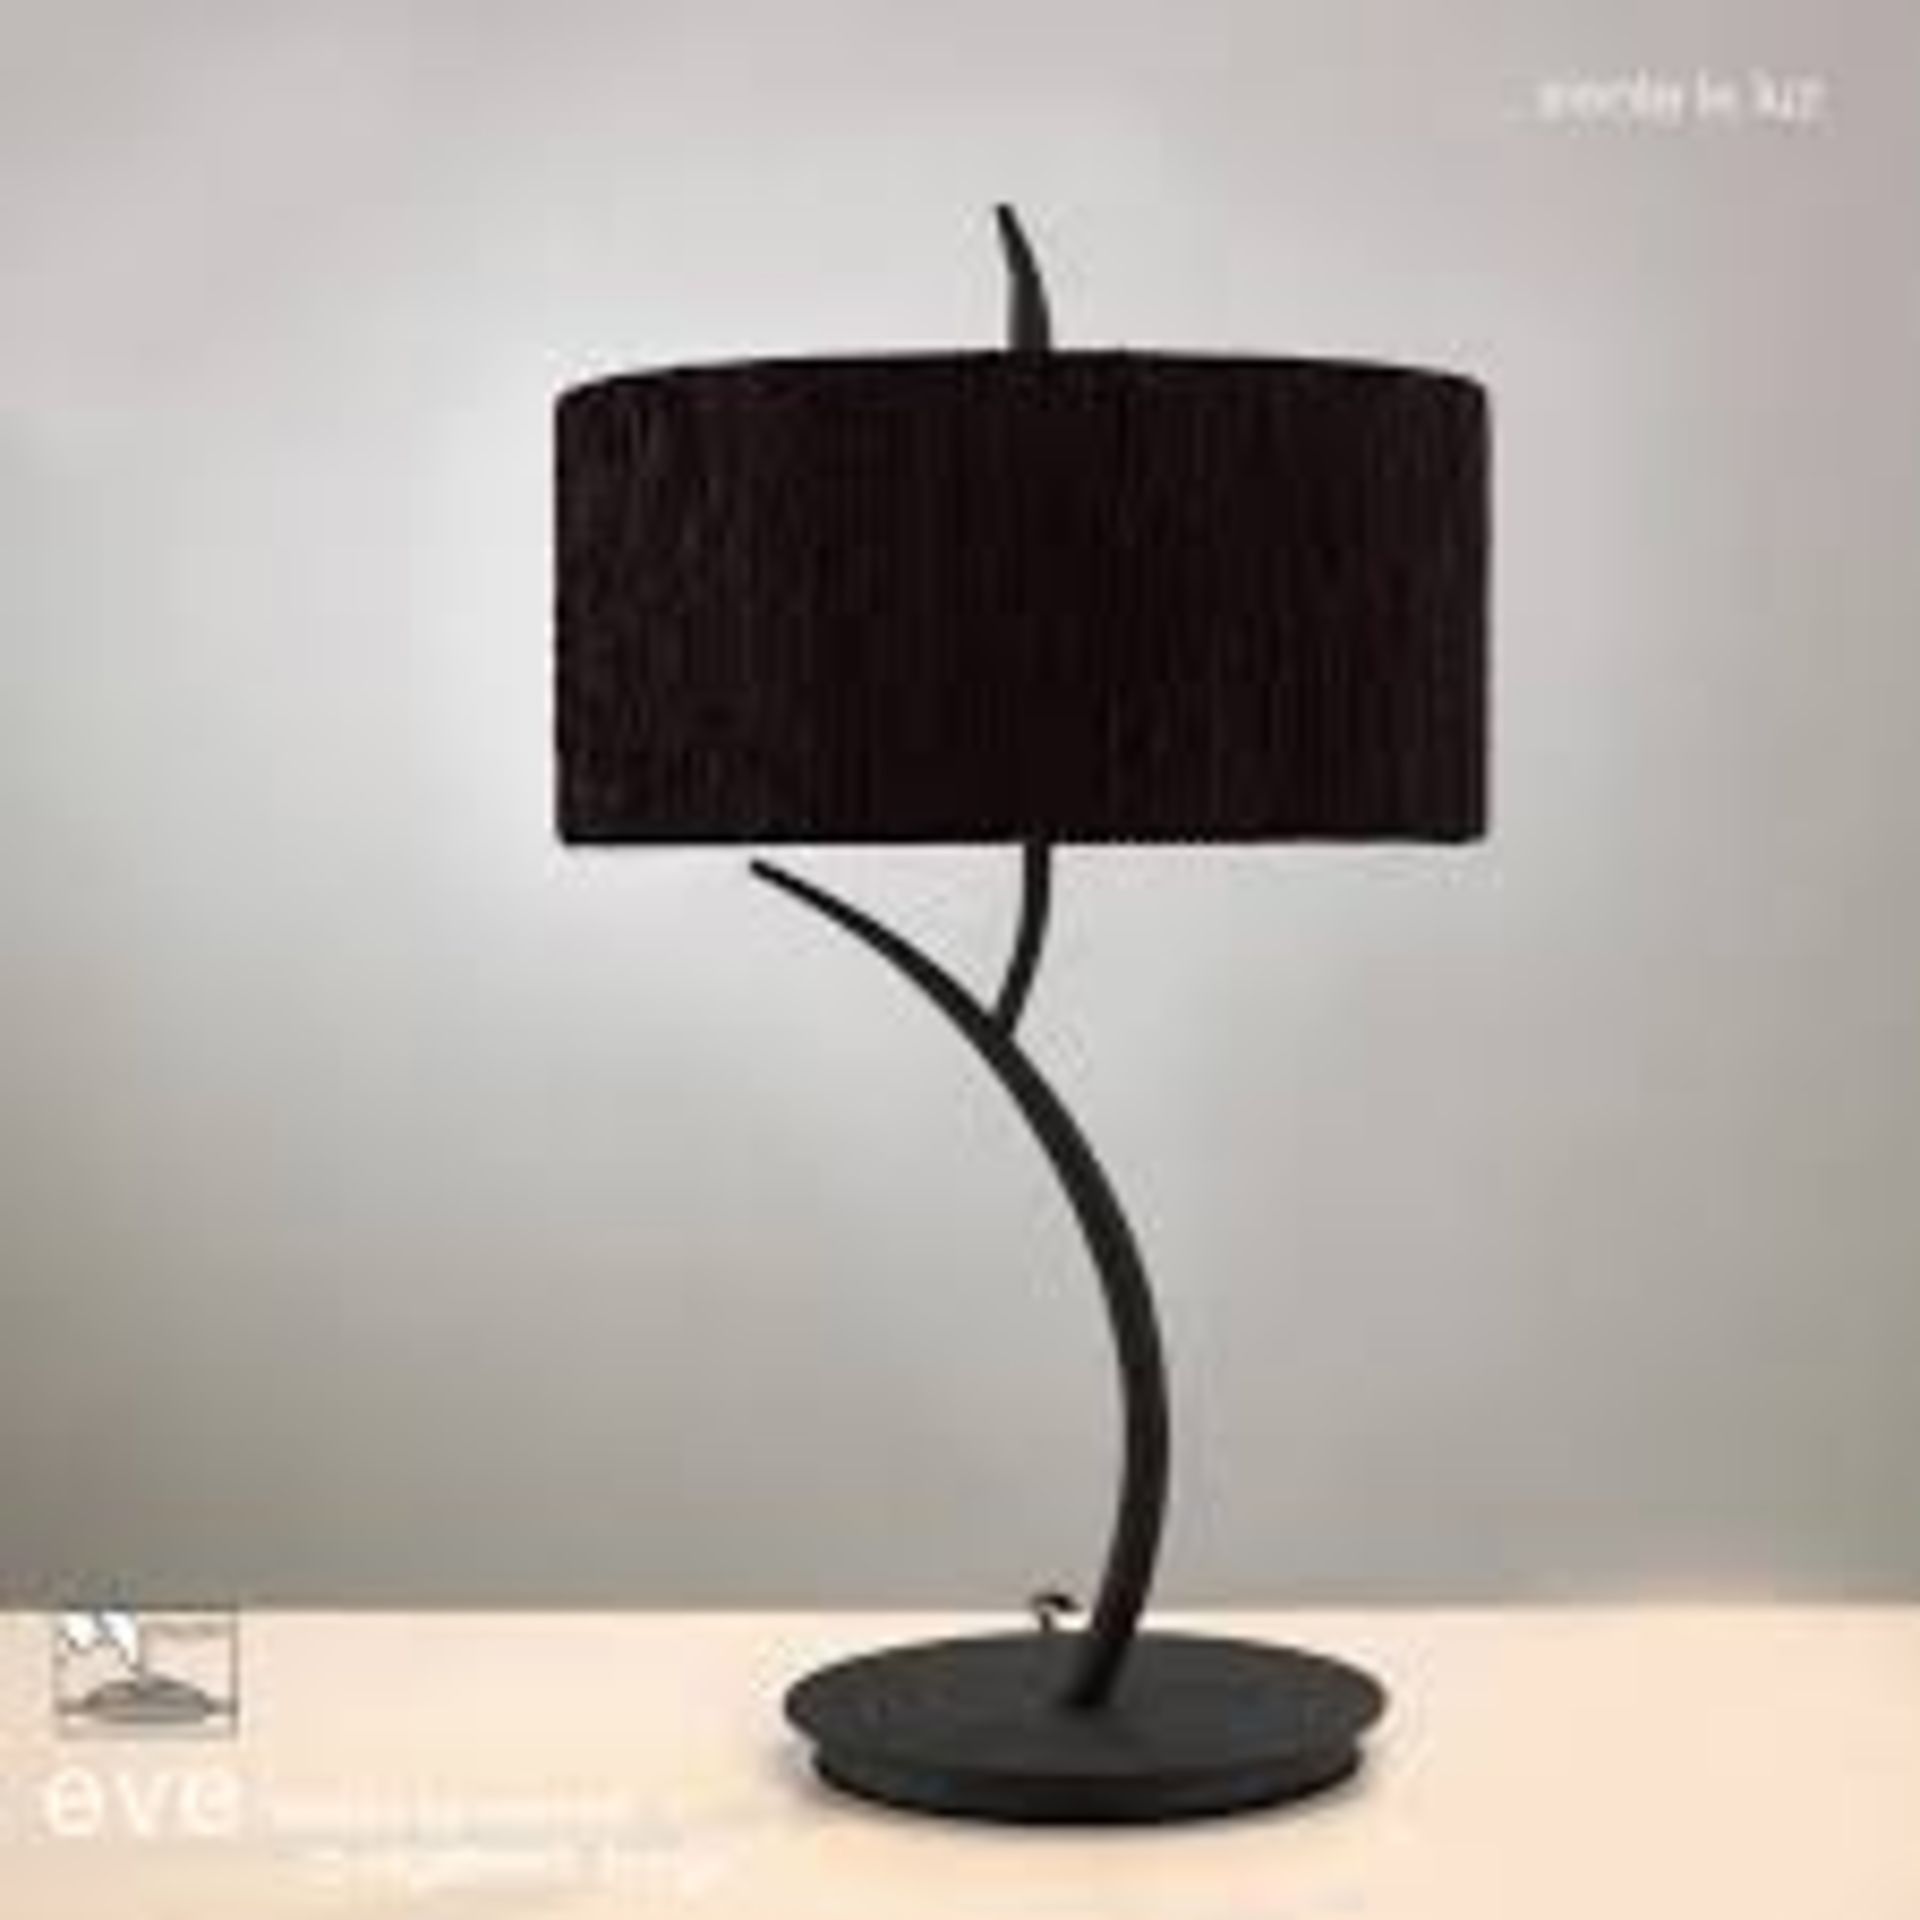 Boxed Mantra Two Light Eve Luces Table Lamp RRP £125 (17105) (10.01.20) (Public Viewing and